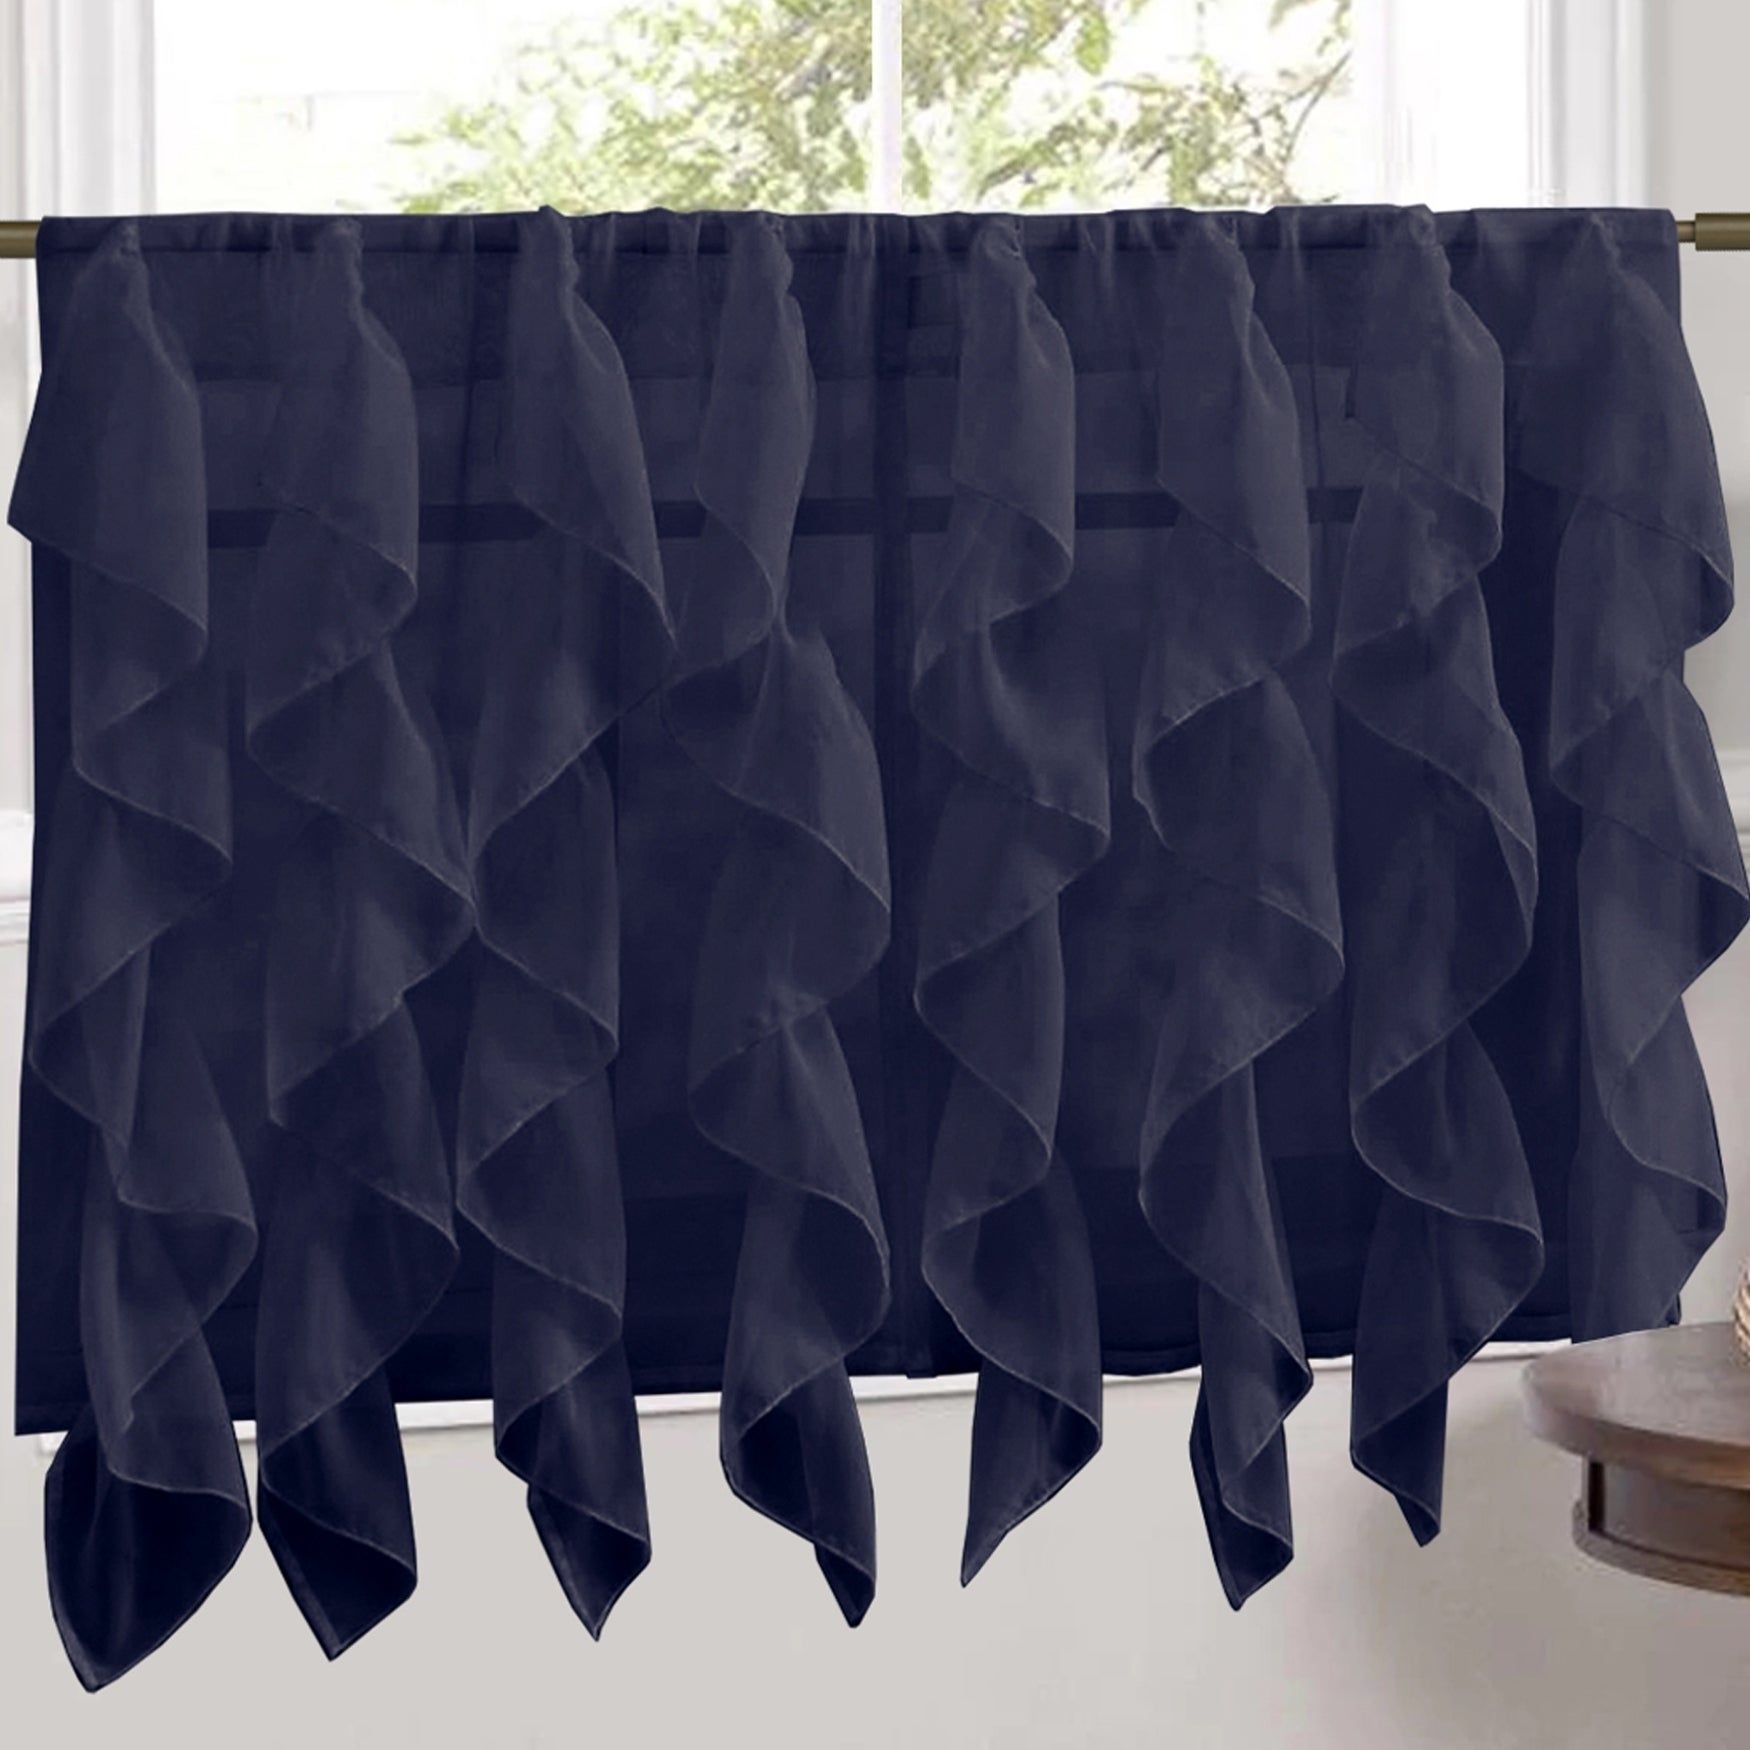 Sweet Home Collection Navy Vertical Ruffled Waterfall Valance And Curtain  Tiers Pertaining To Navy Vertical Ruffled Waterfall Valance And Curtain Tiers (Photo 5 of 20)